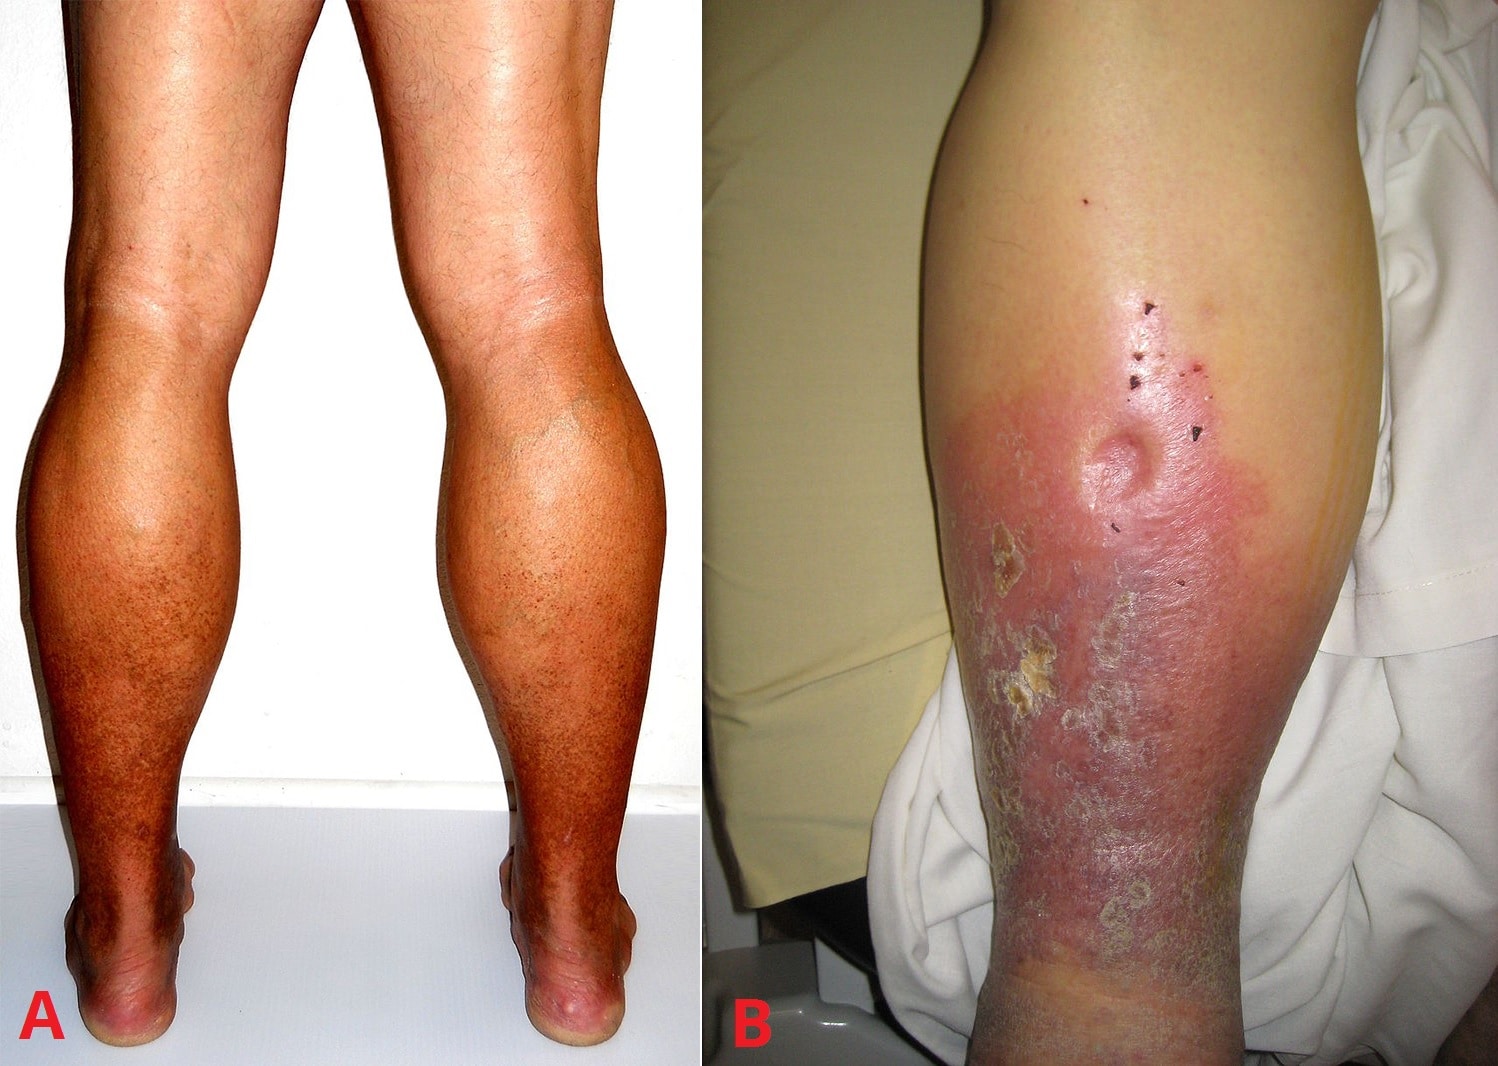 Fig 2 - Skin changes associated with venous insufficiency. A - hyperpigmentation of the limbs. B - pitting oedema and lipodermatosclerosis.